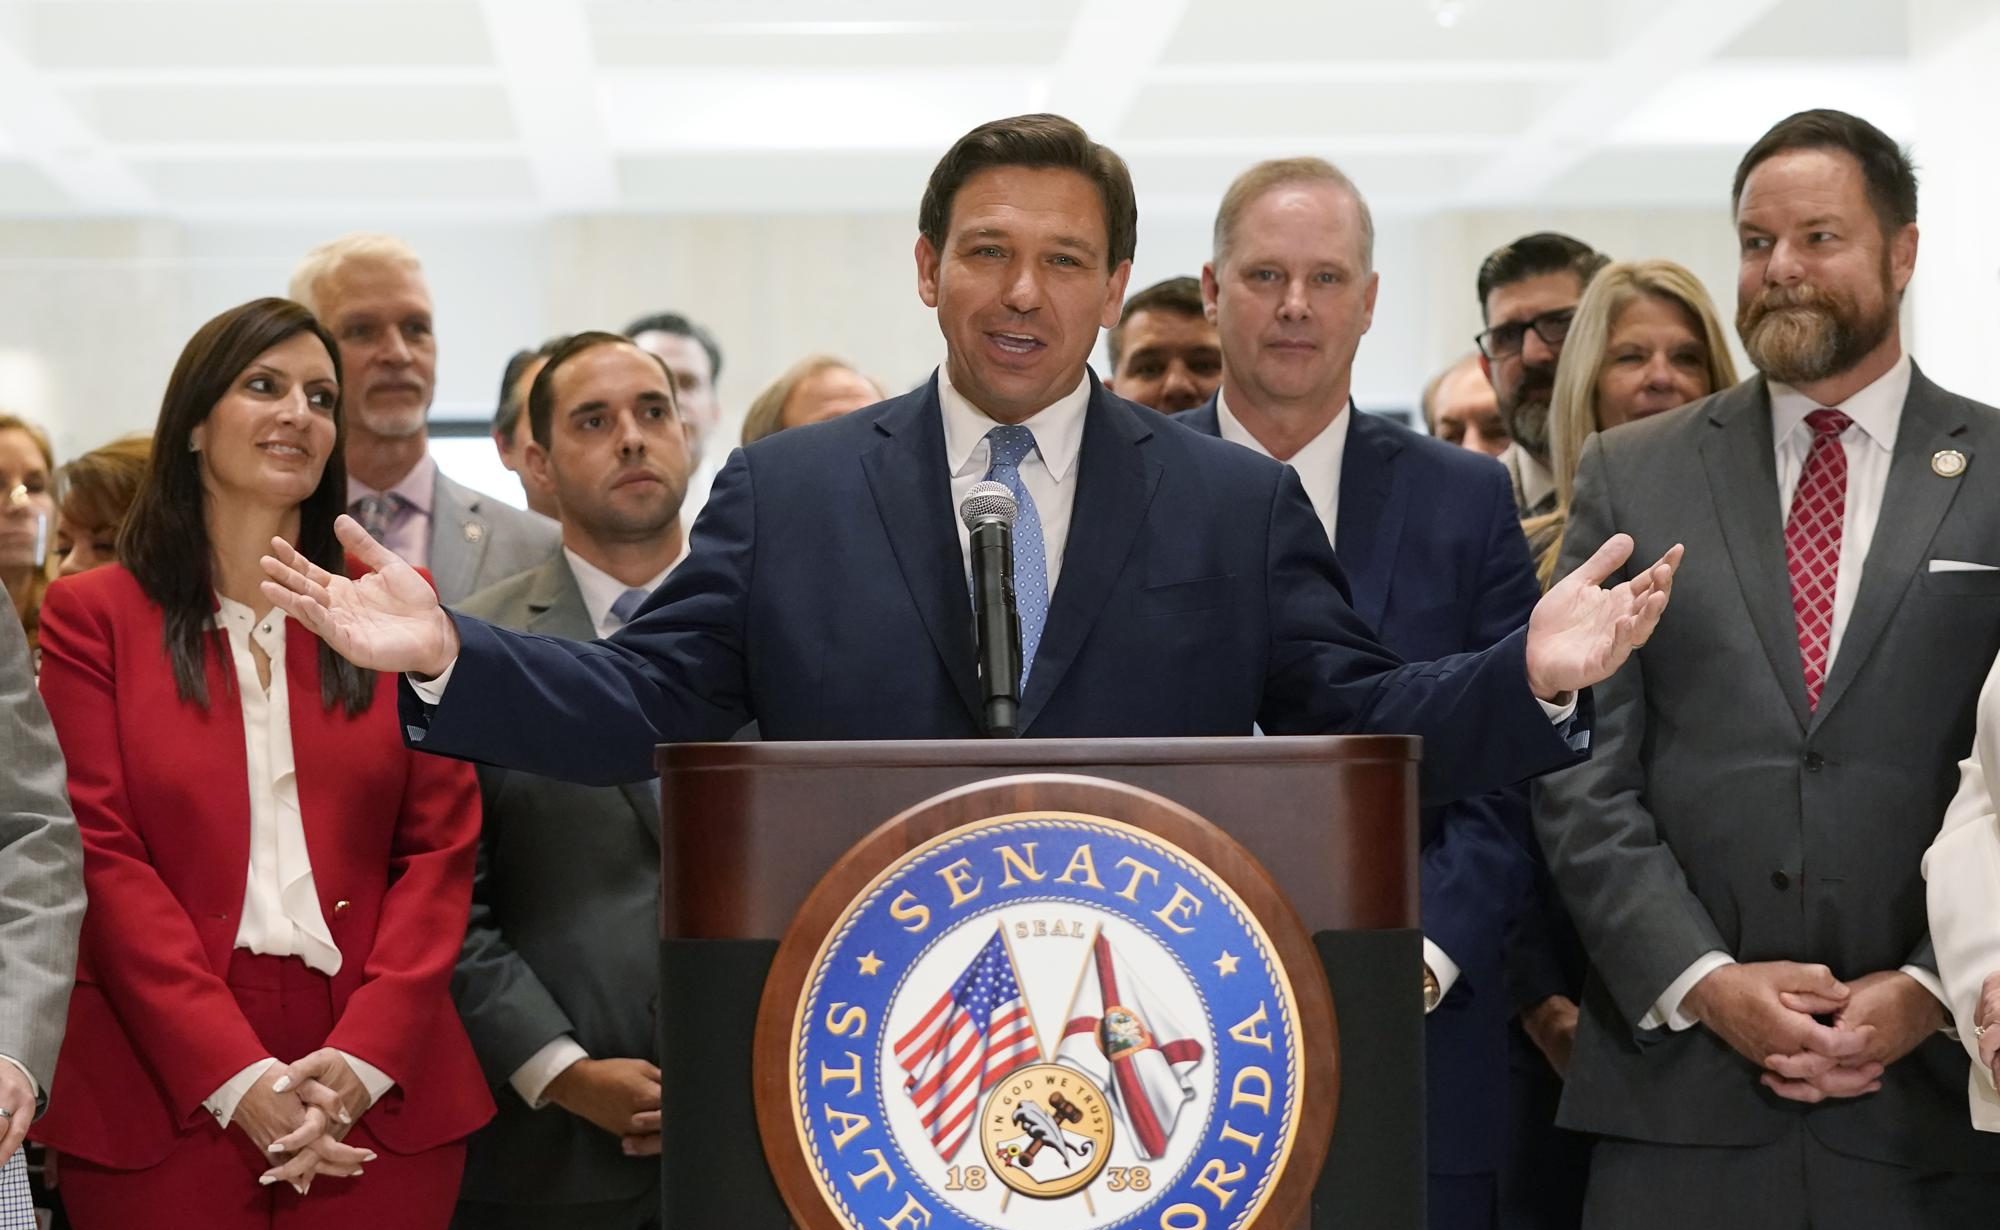 DeSantis wants to be Trump 2.0, but will voters agree?